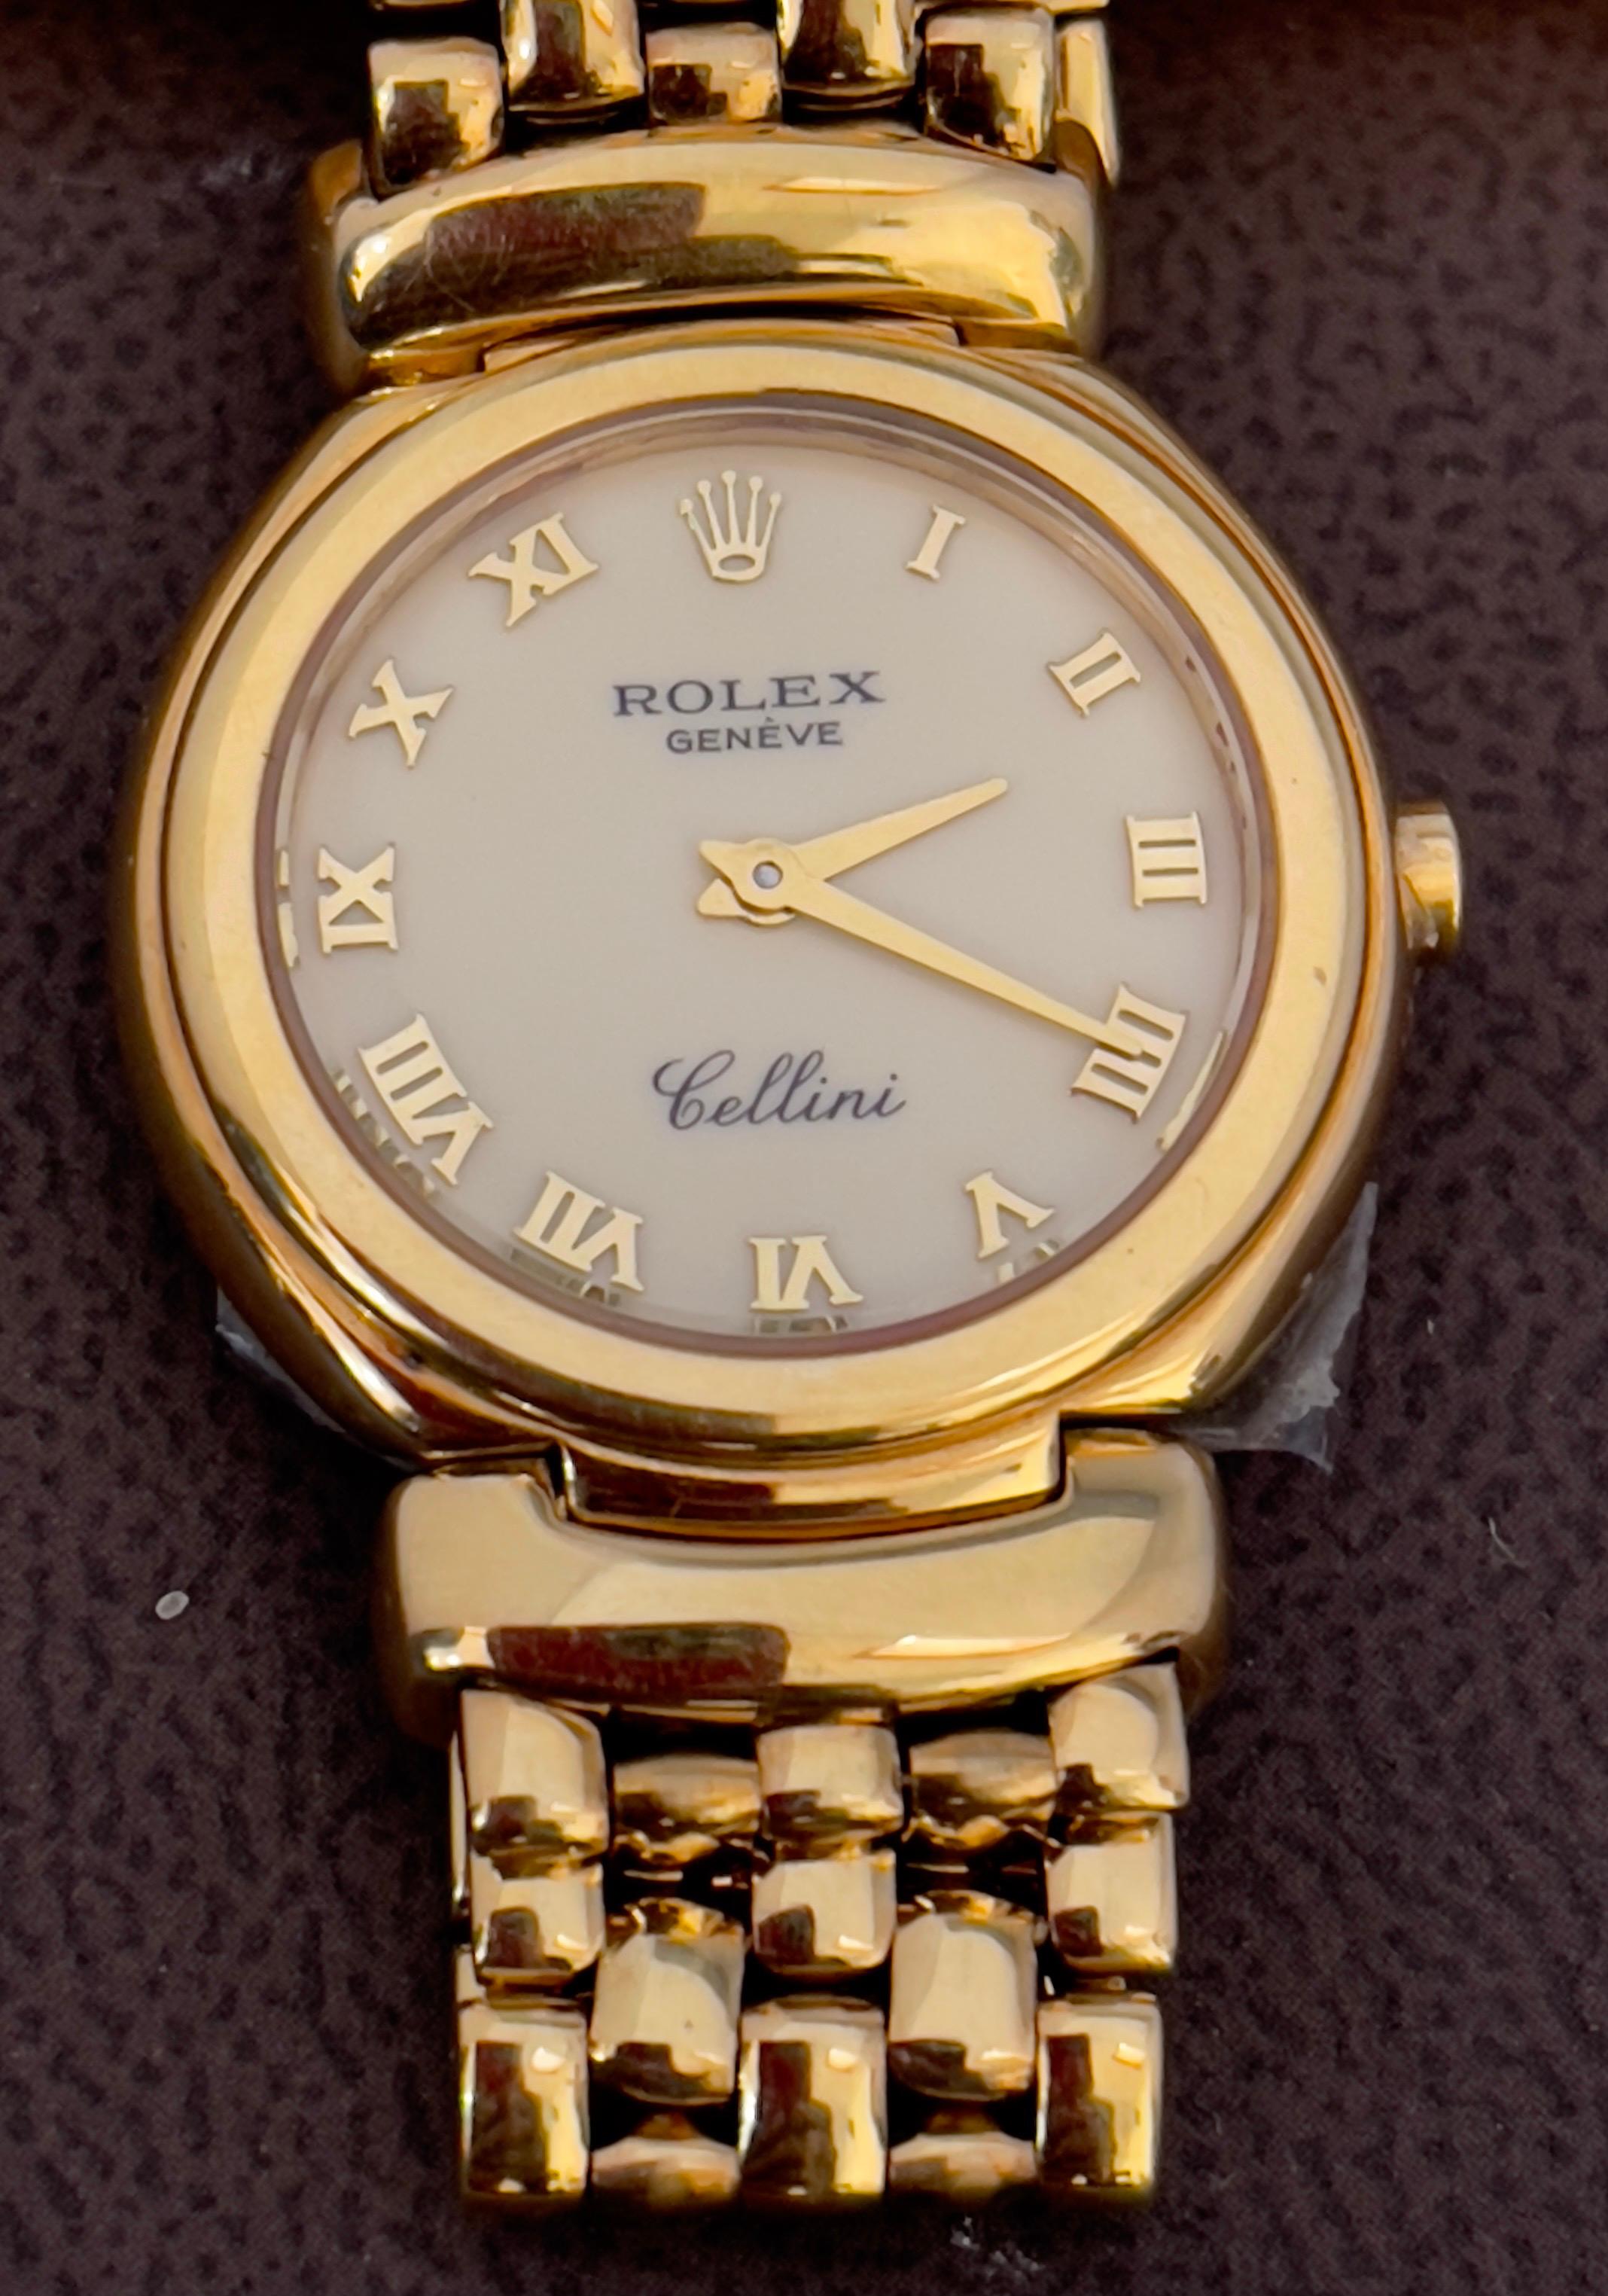 Rolex 'Cellini' 18 Karat Gold Mother of Pearl Watch 66.5 Grams 5